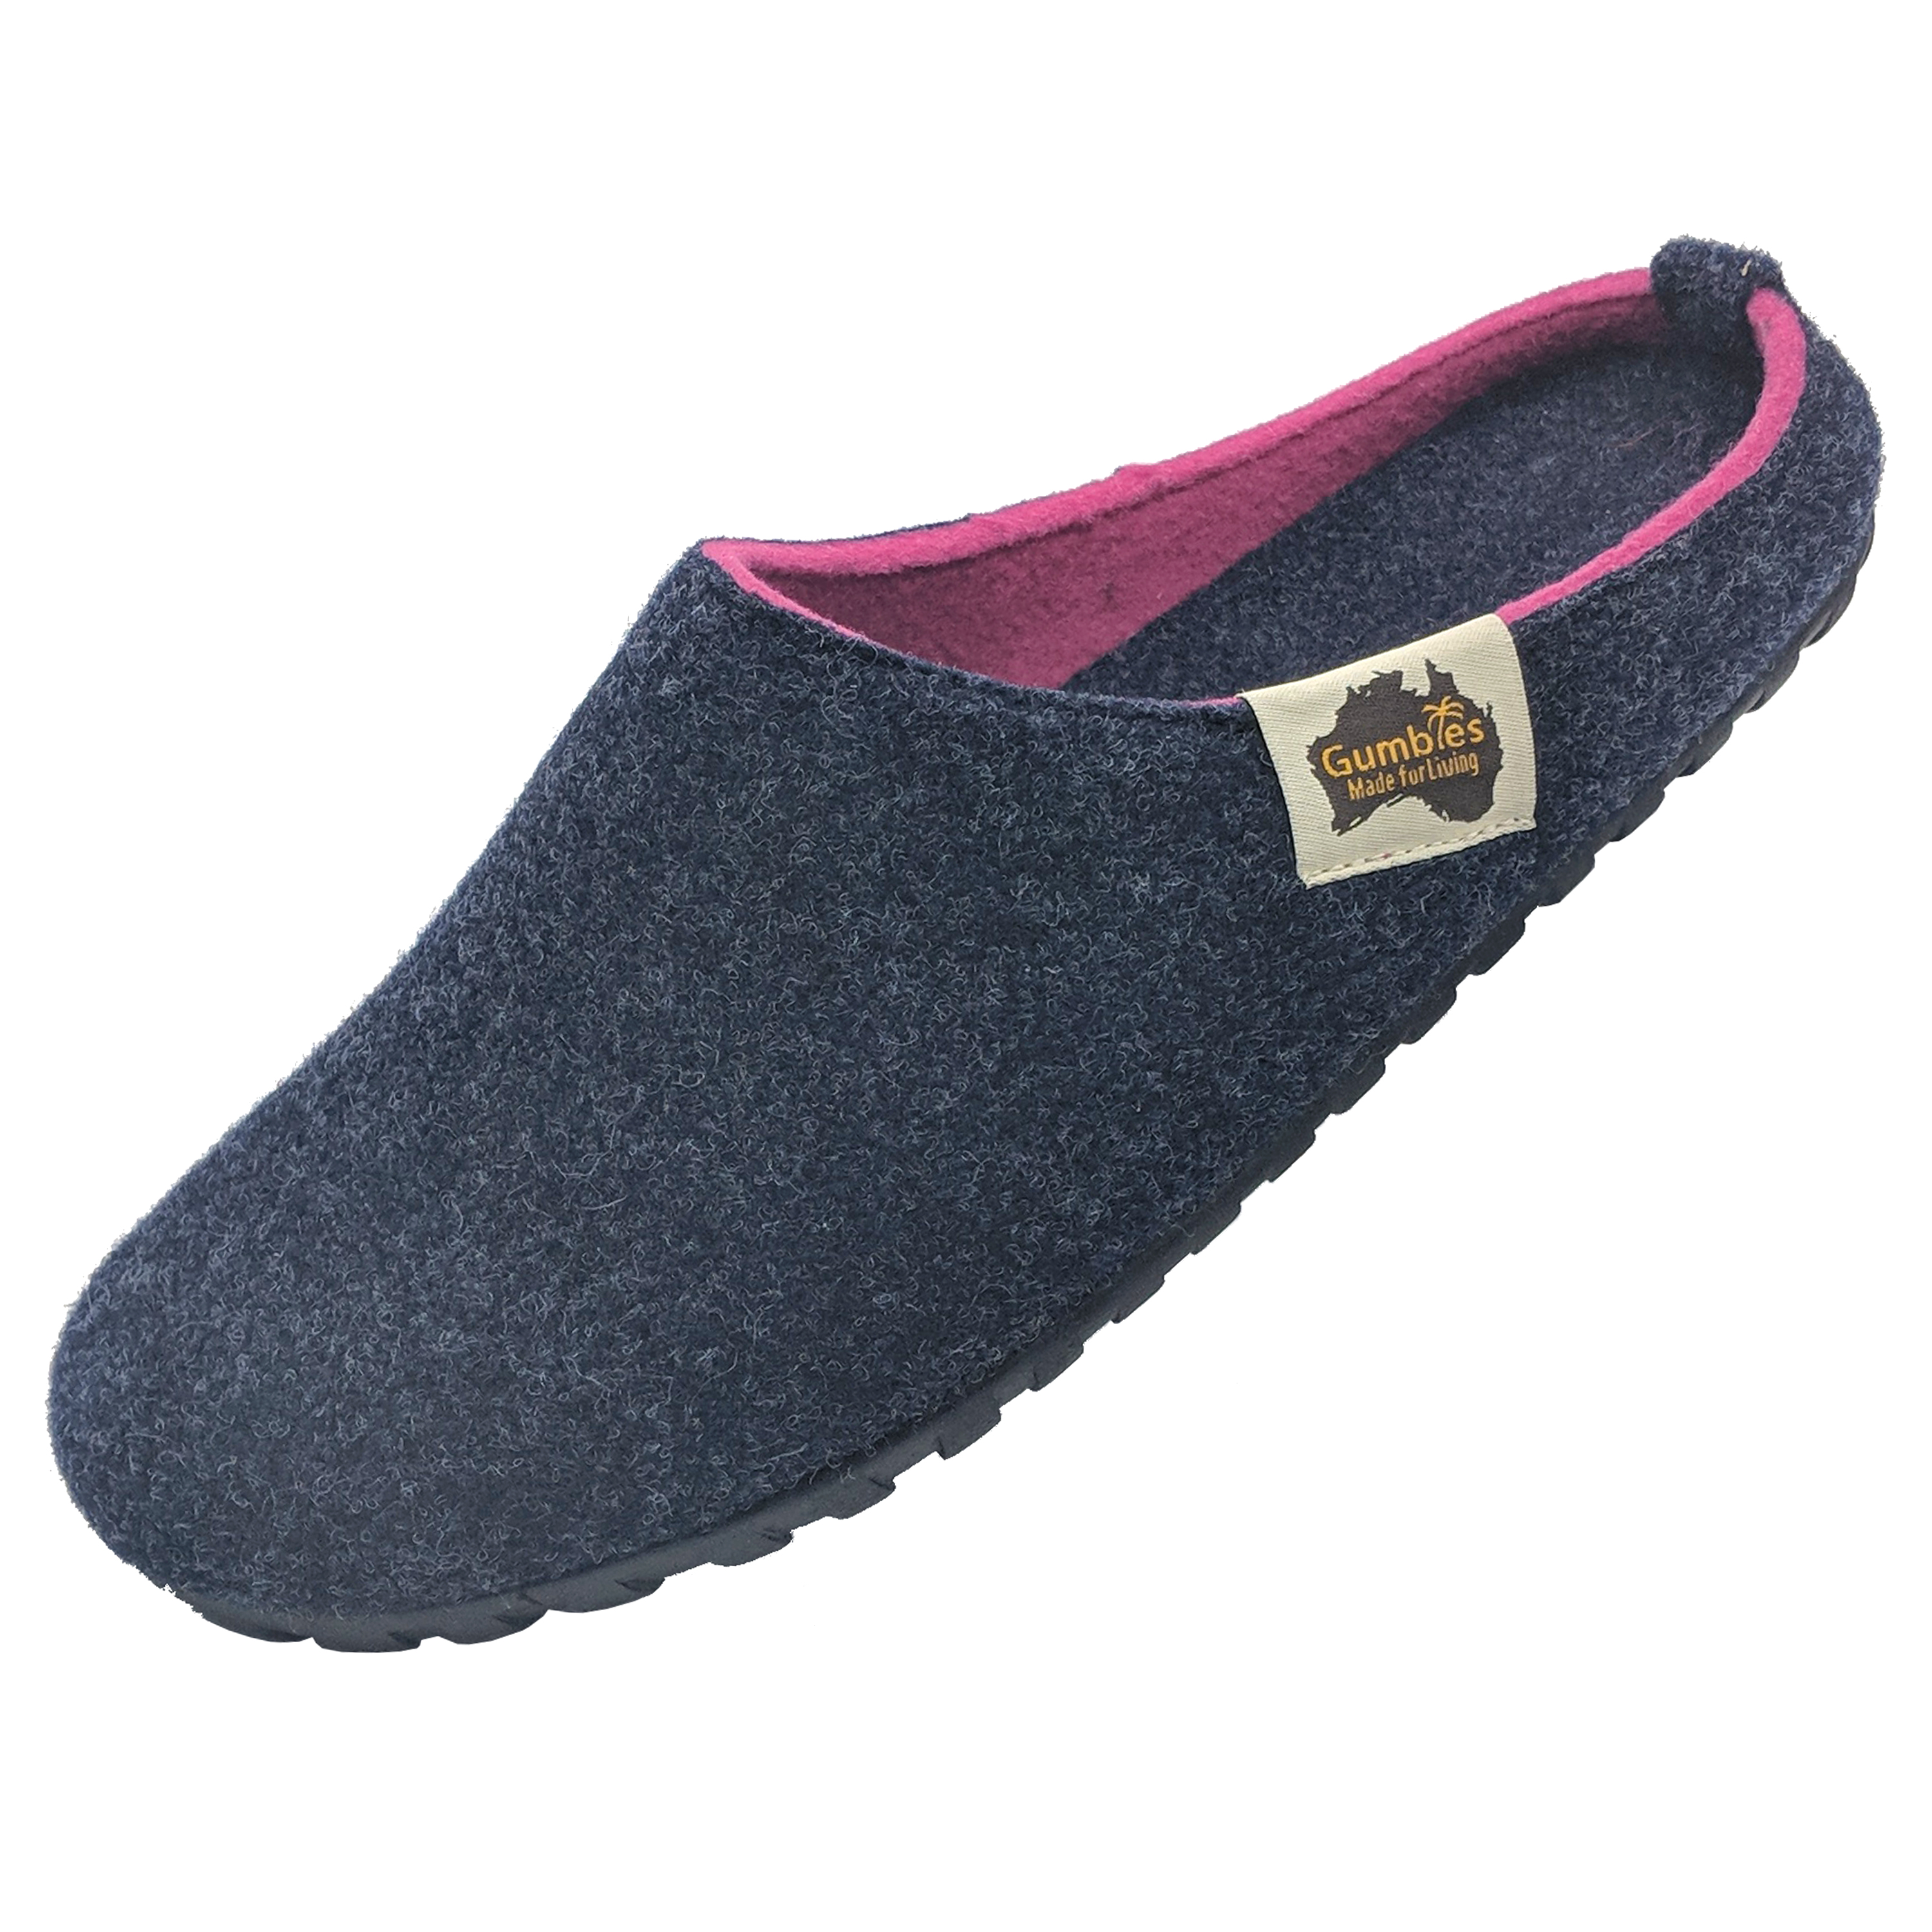 GUMBIES – Outback Slipper, Navy Pink 